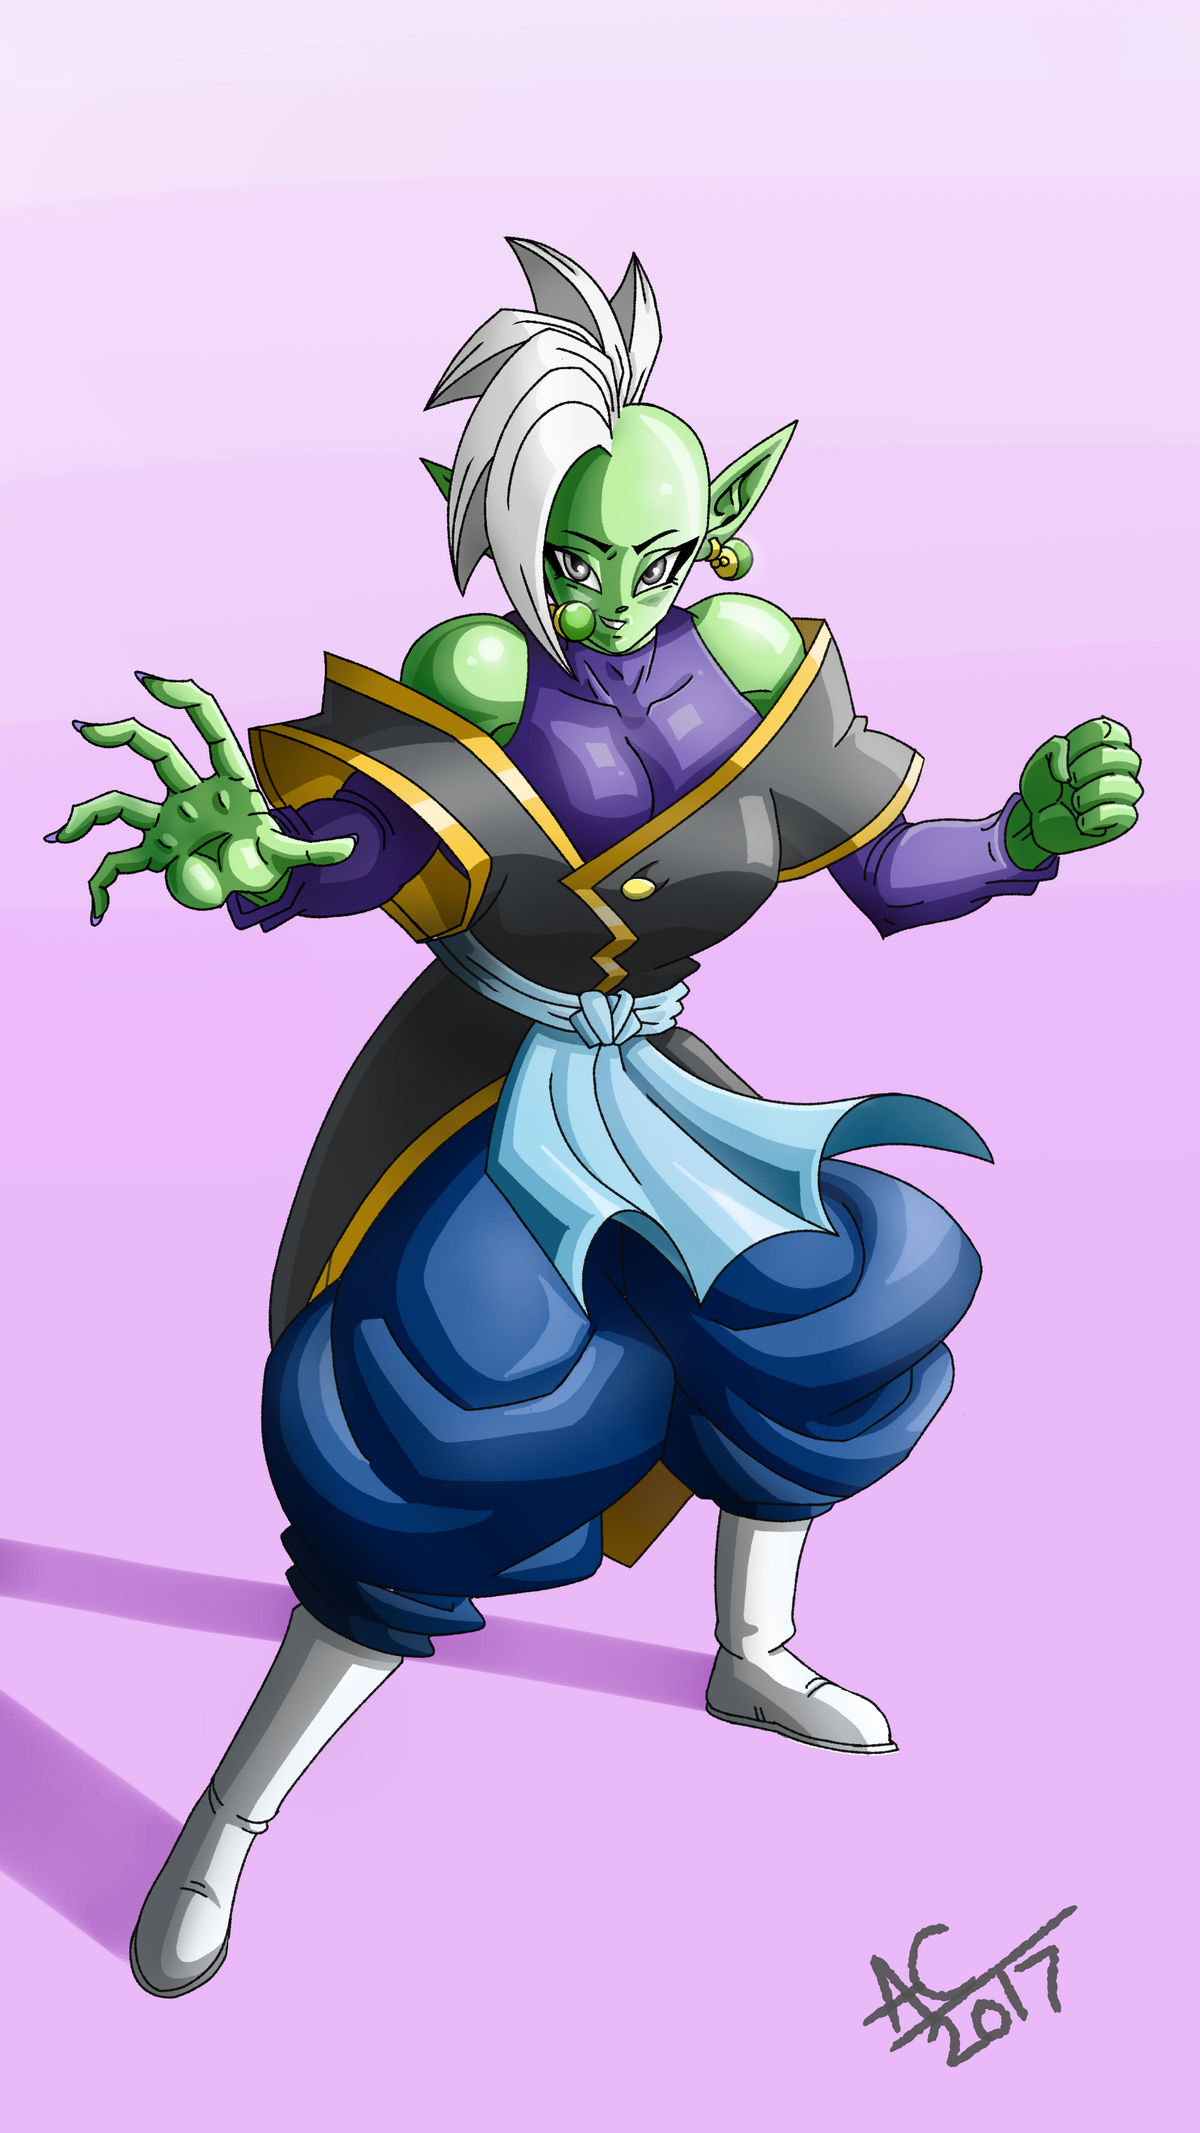 Zamasu Dragon Ball Series What If Characters Were Gender Swapped Original Created Or What 3676